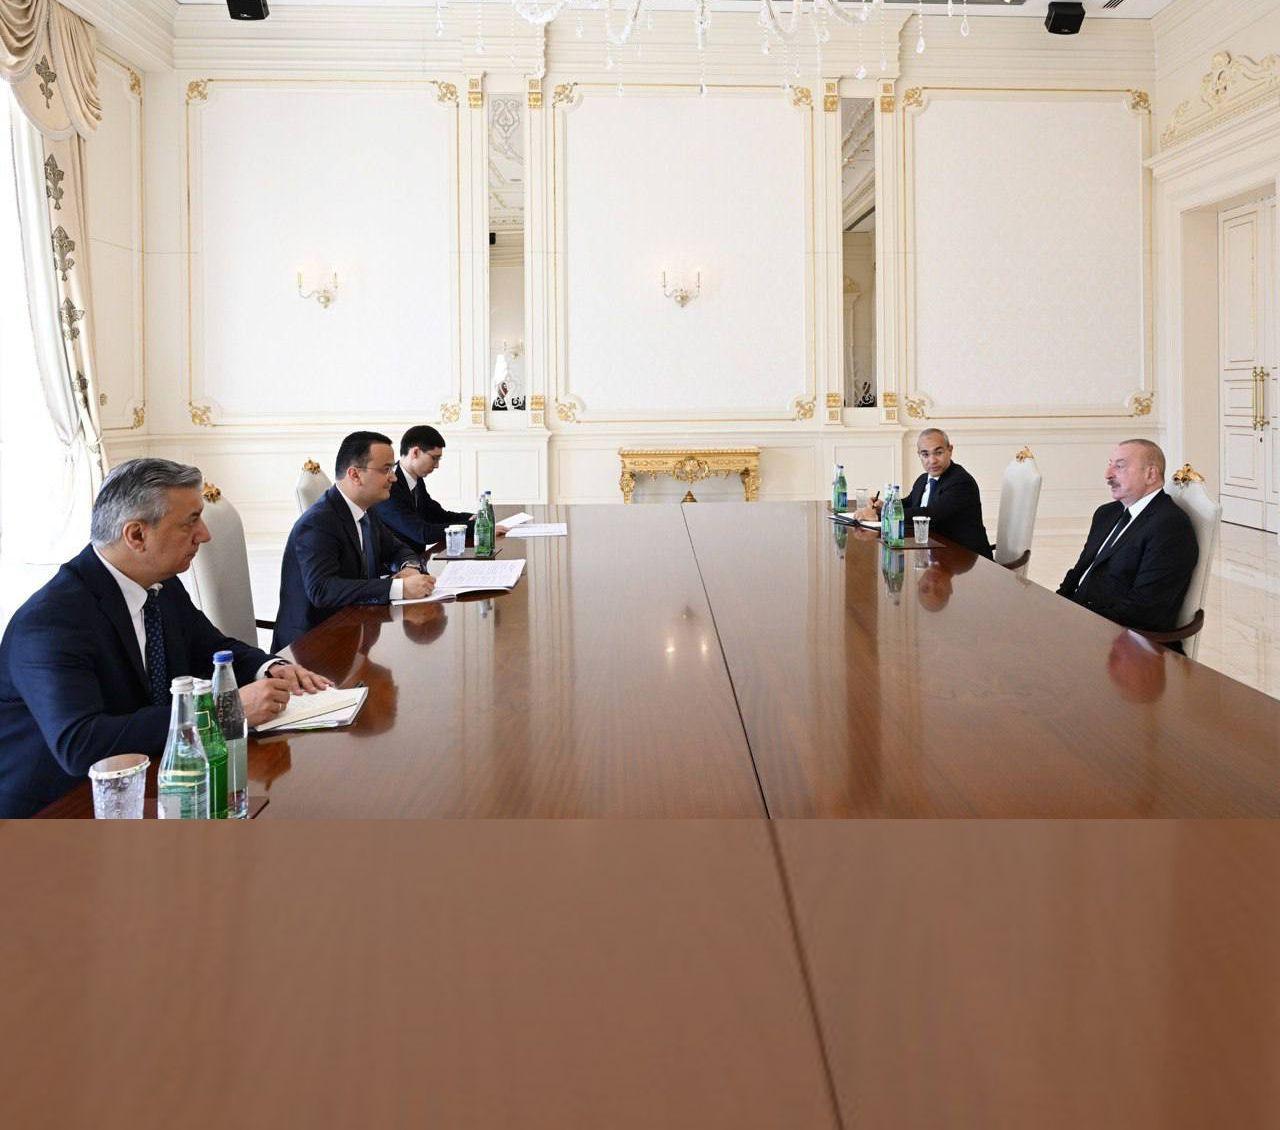 The Minister of Investments of Uzbekistan Met with the President of Azerbaijan